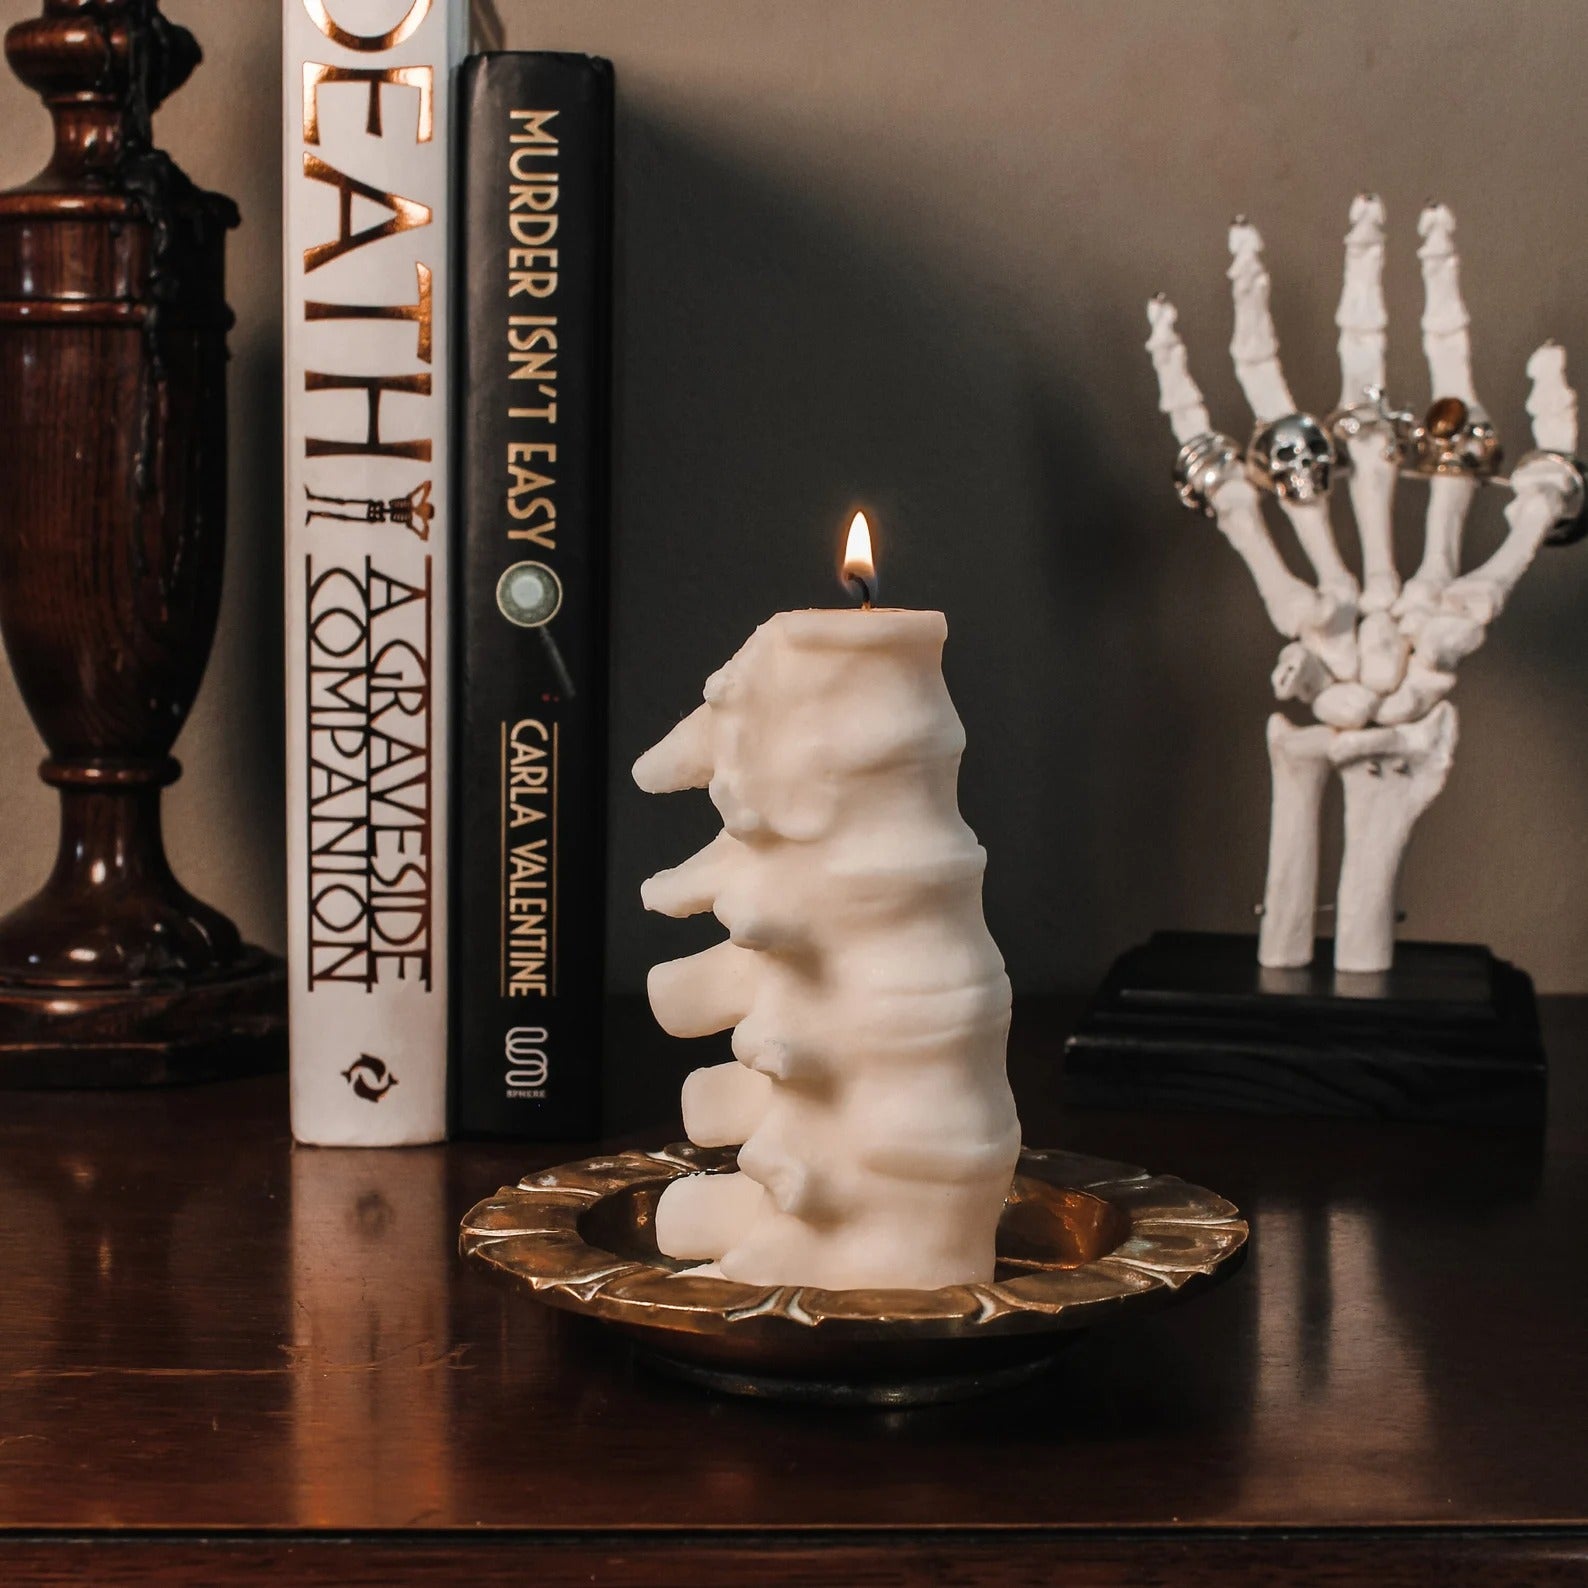 The lit candle in white